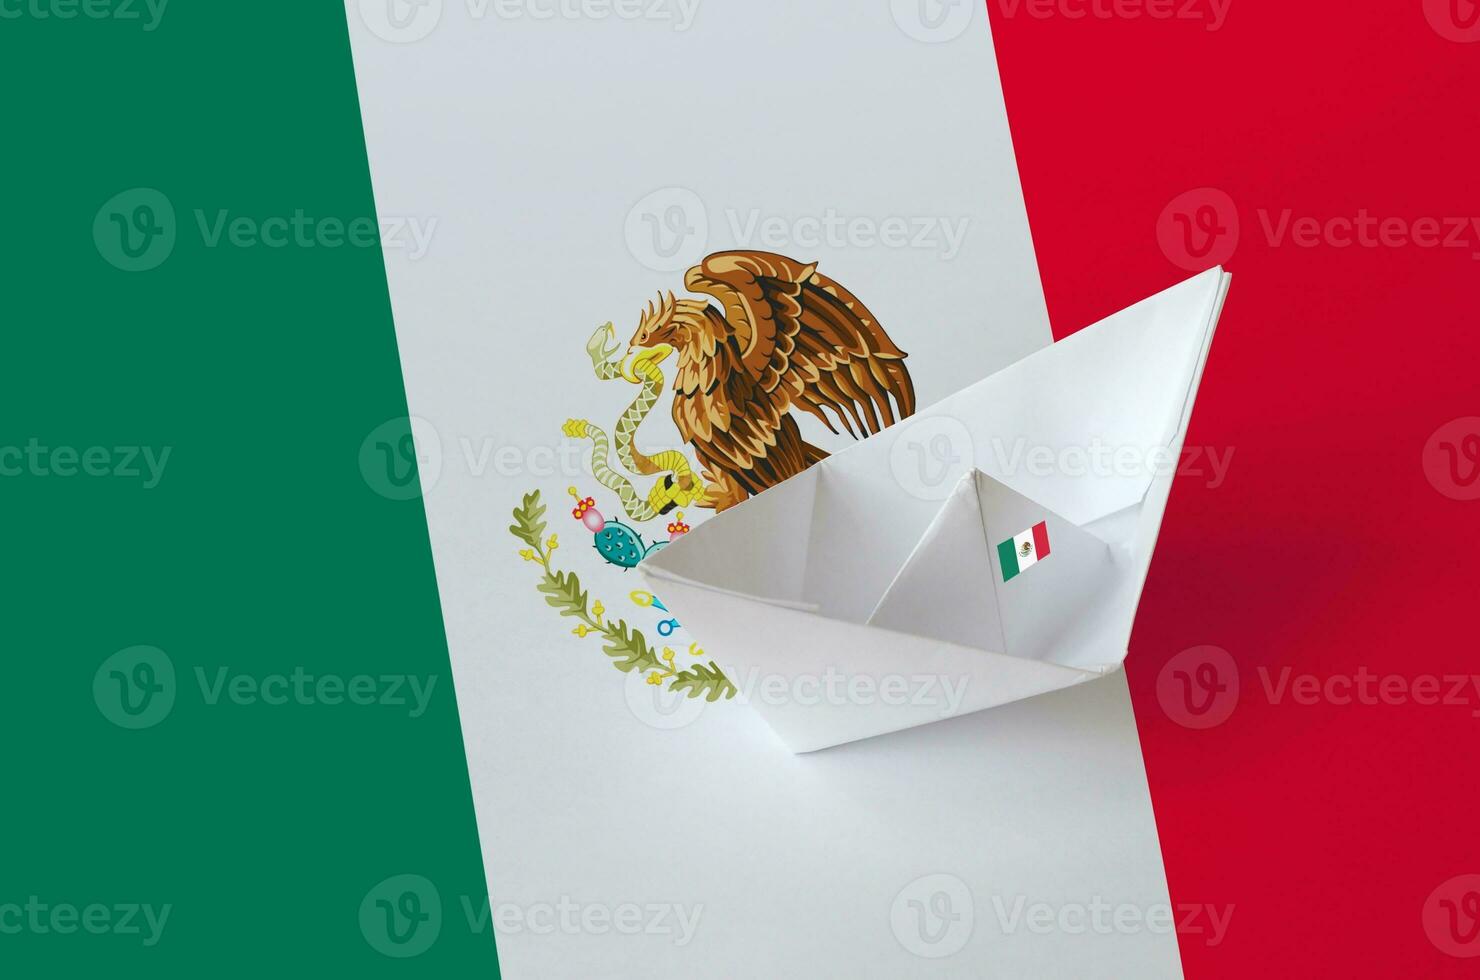 Mexico flag depicted on paper origami ship closeup. Handmade arts concept photo